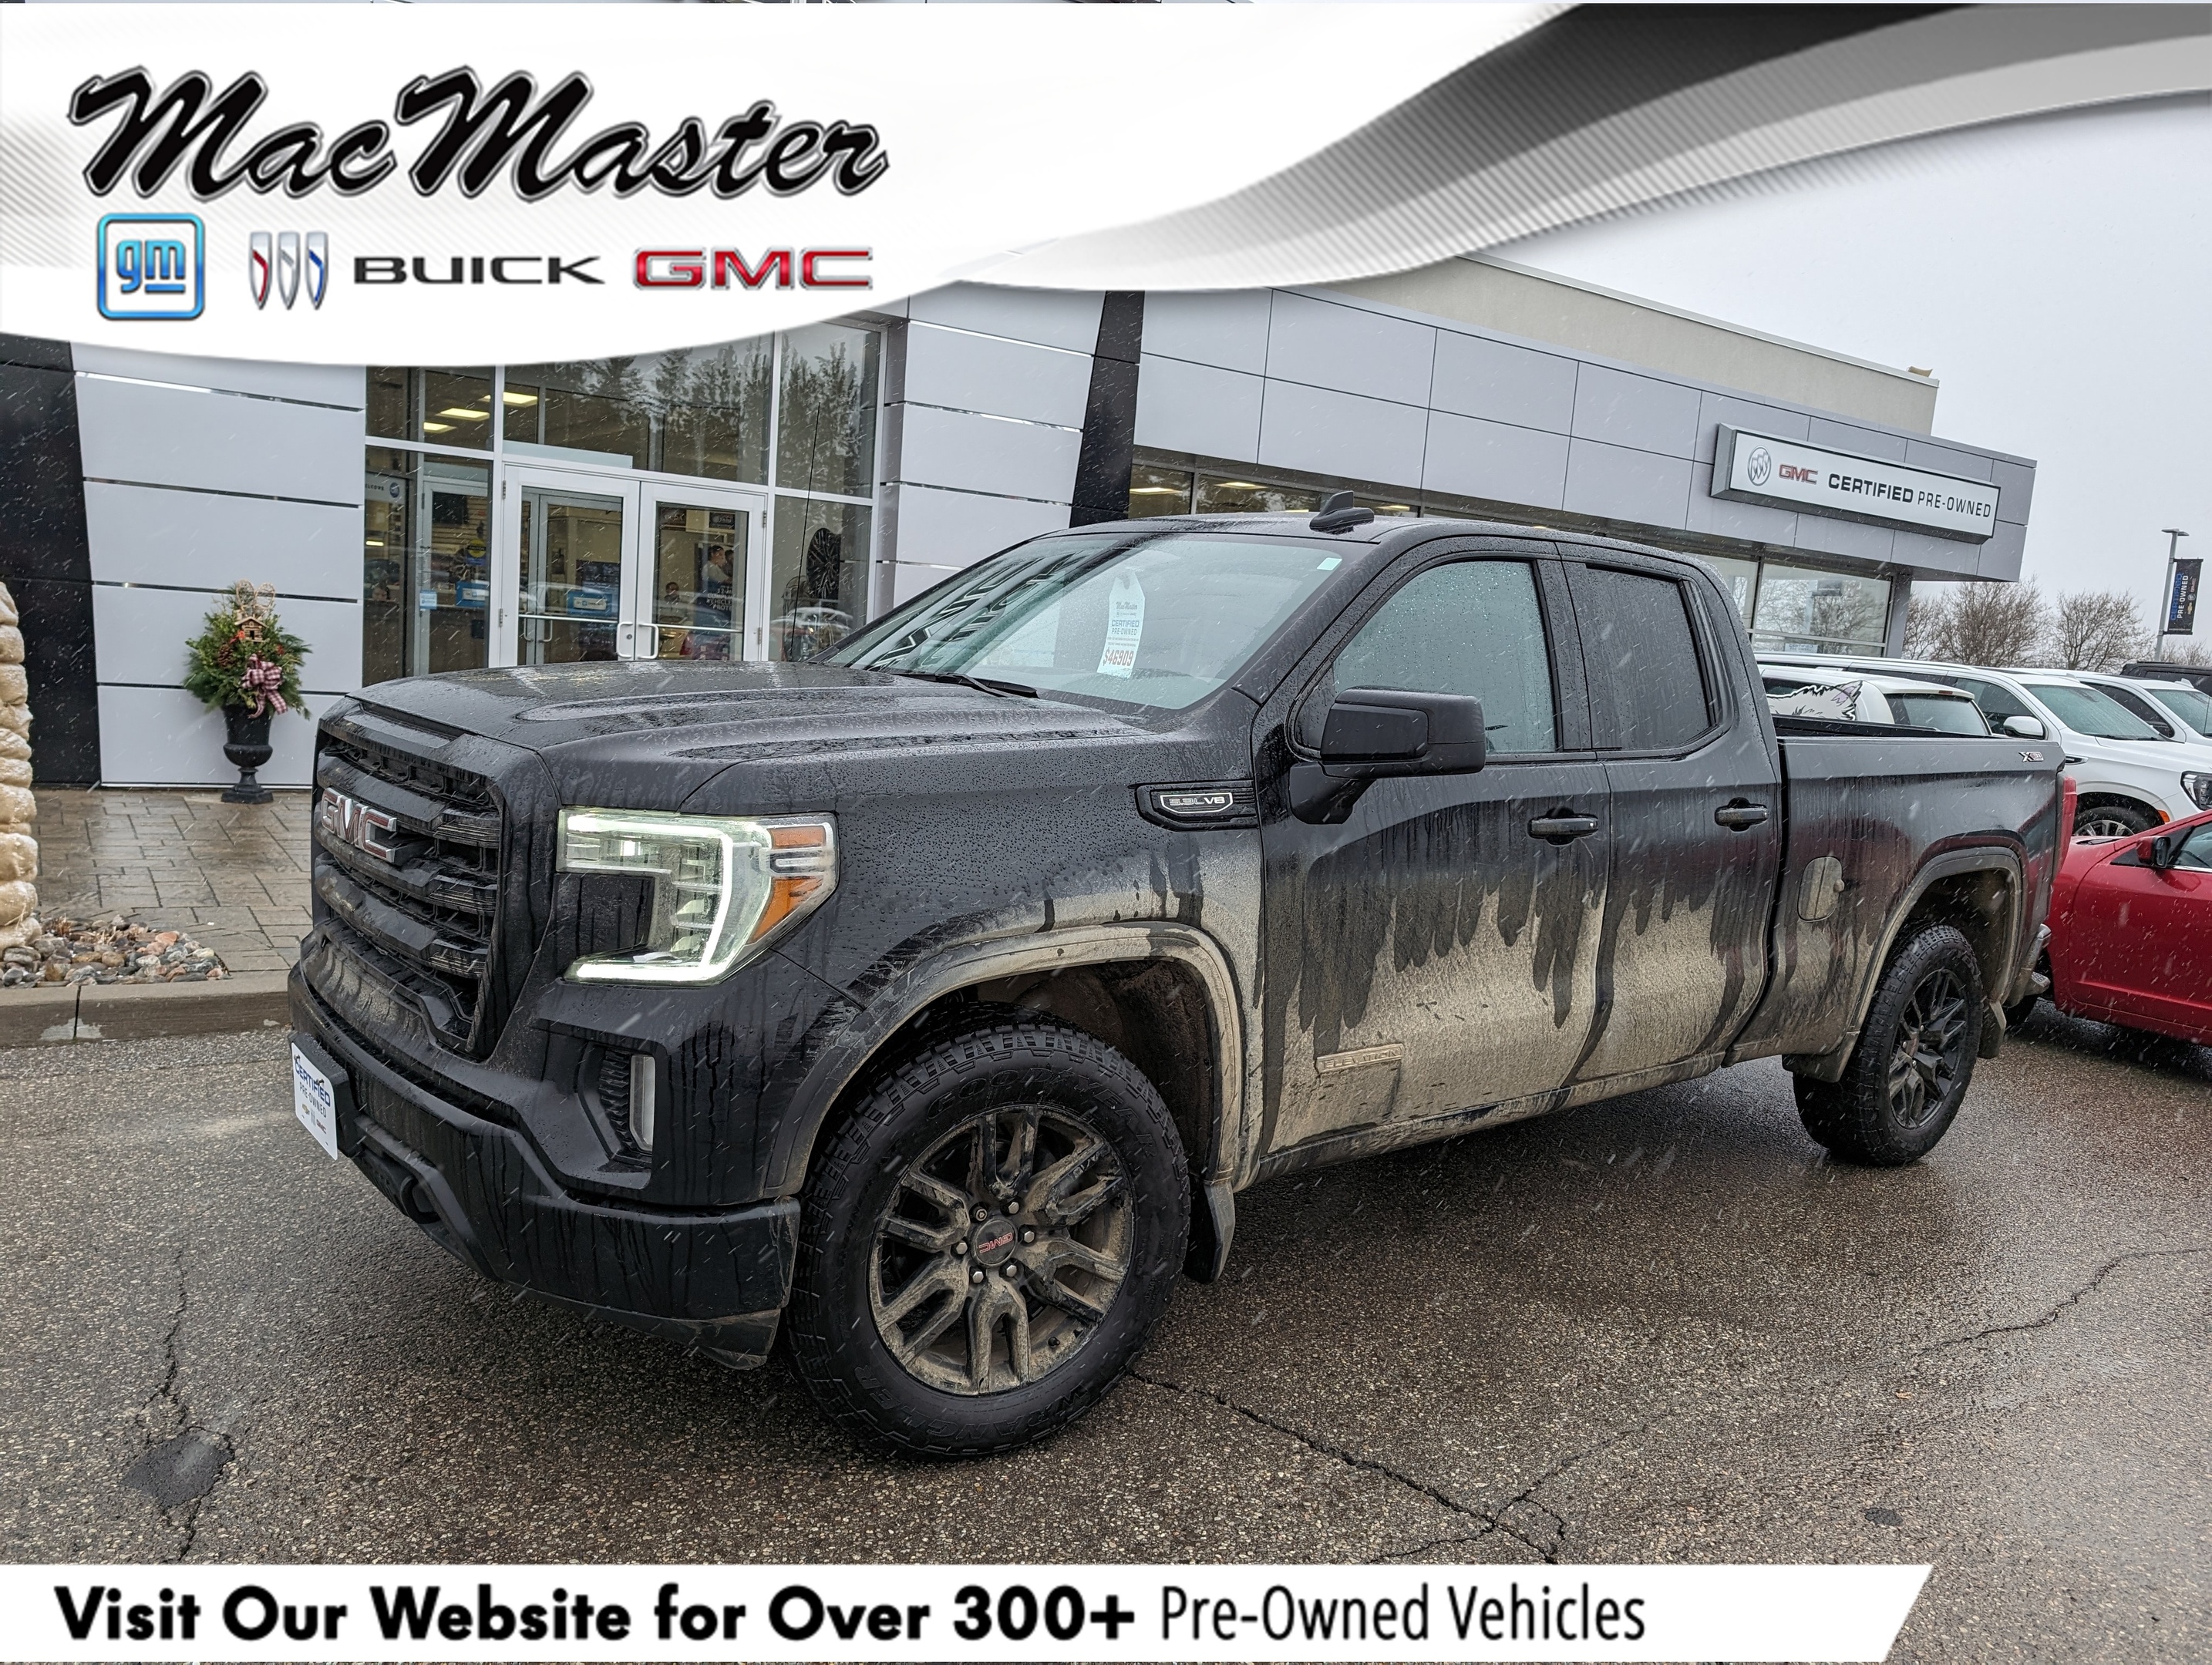 2021 GMC Sierra 1500 ELEVATION, DOUBLE, 4X4, 5.3L, HTD CLOTH, 1-OWNER!